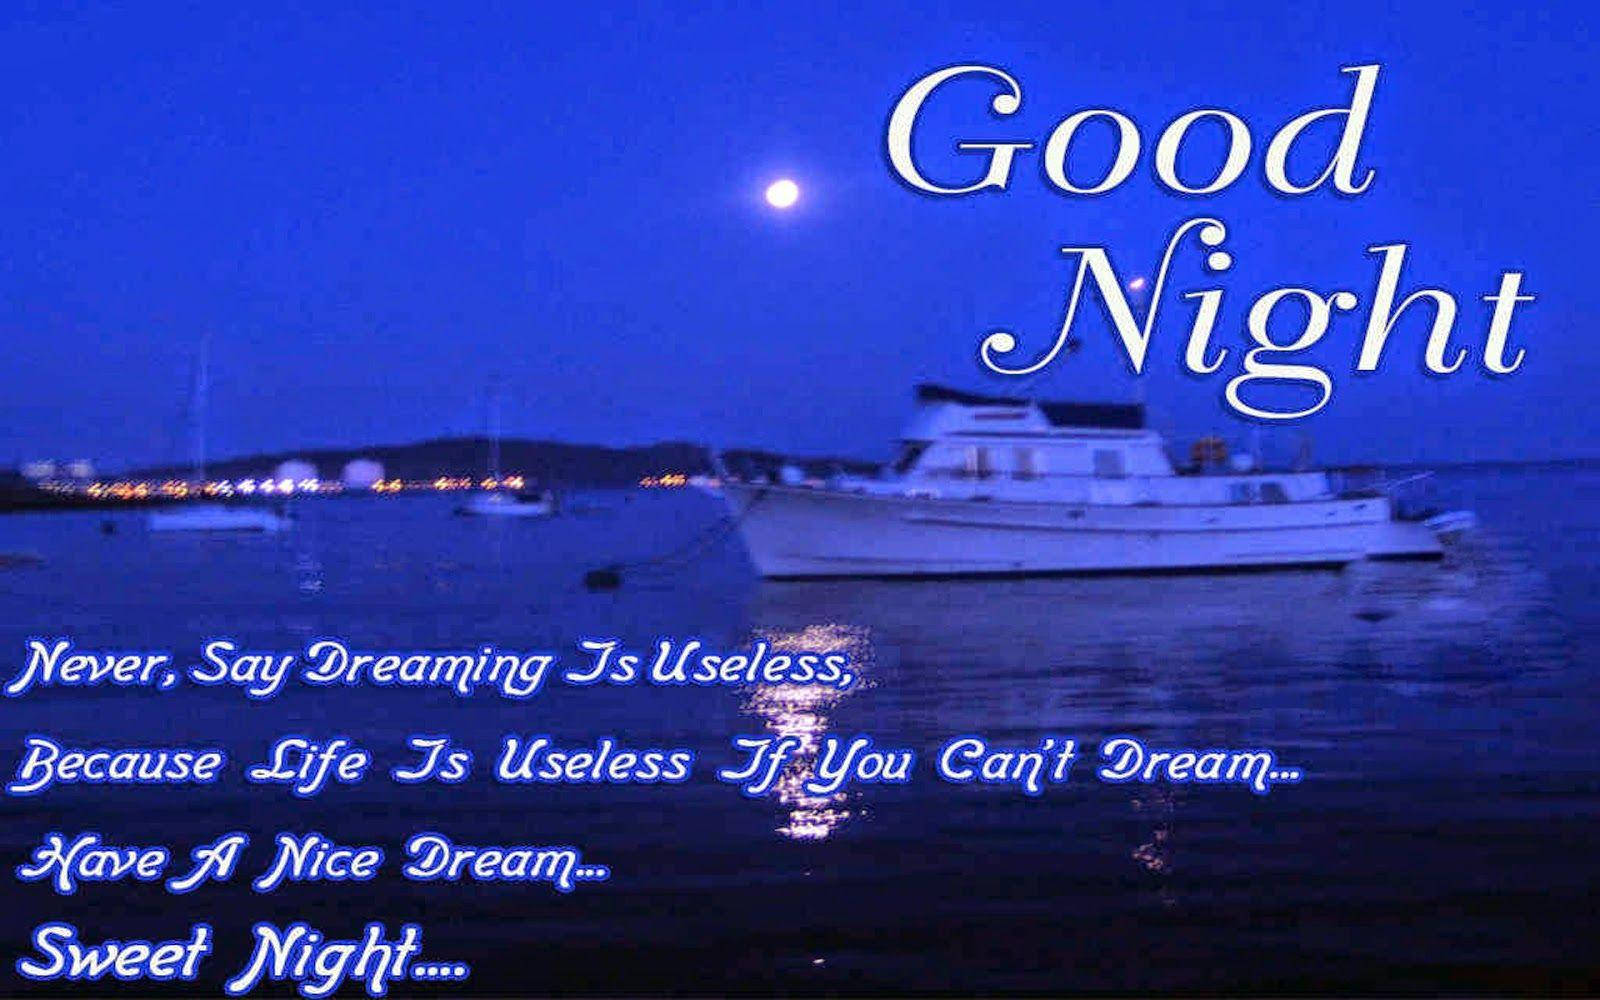 Good Night Wishes With Boatand Moon Wallpaper